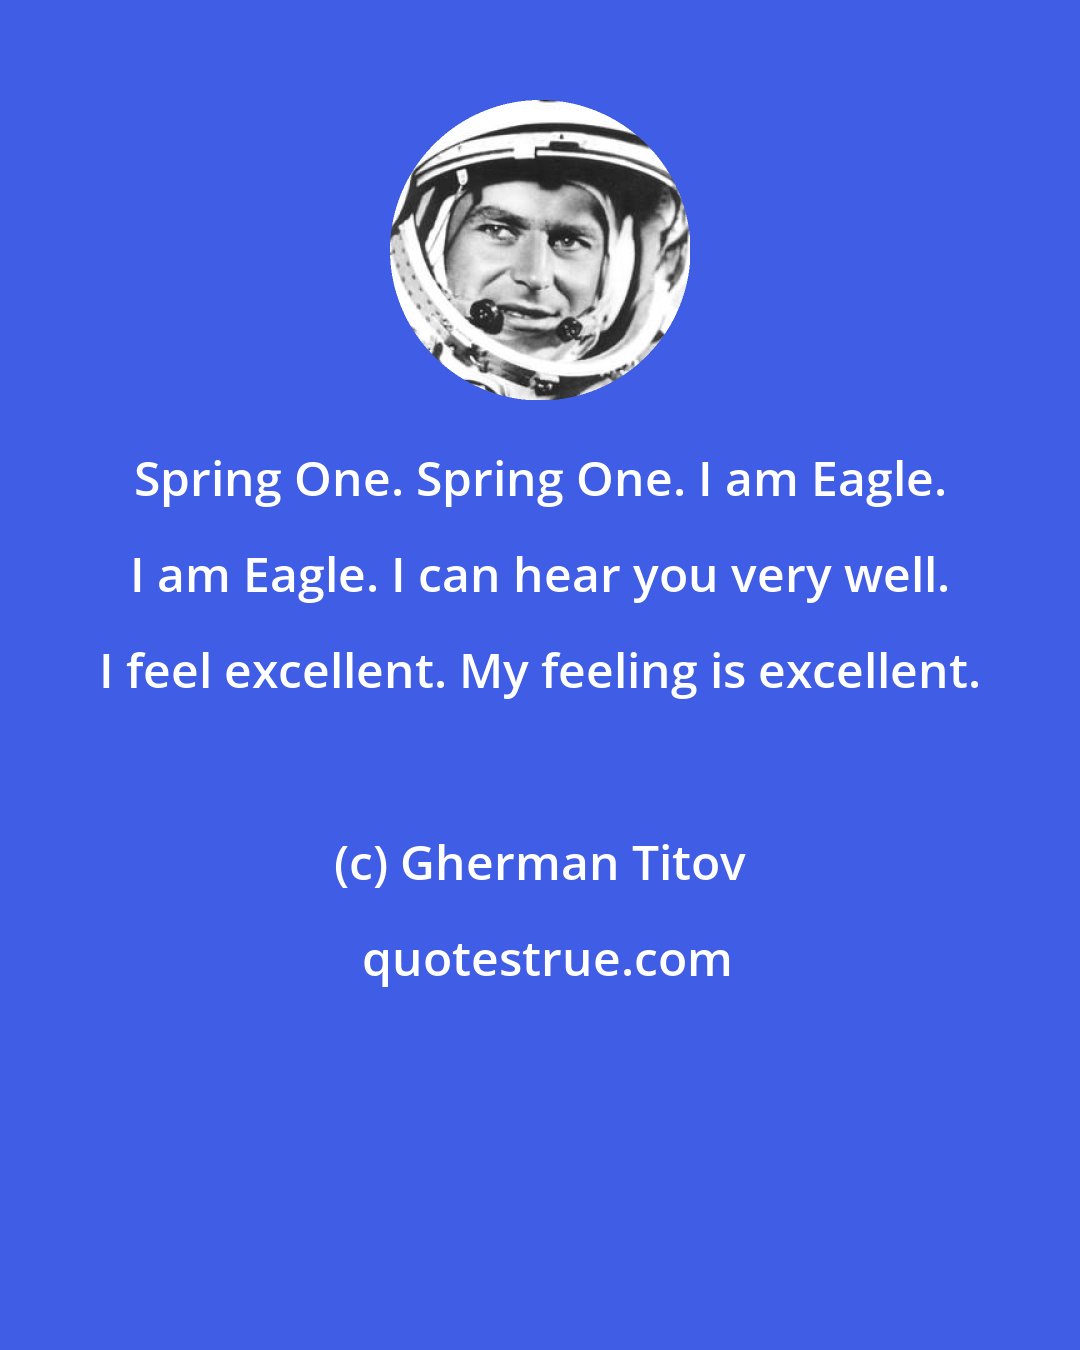 Gherman Titov: Spring One. Spring One. I am Eagle. I am Eagle. I can hear you very well. I feel excellent. My feeling is excellent.